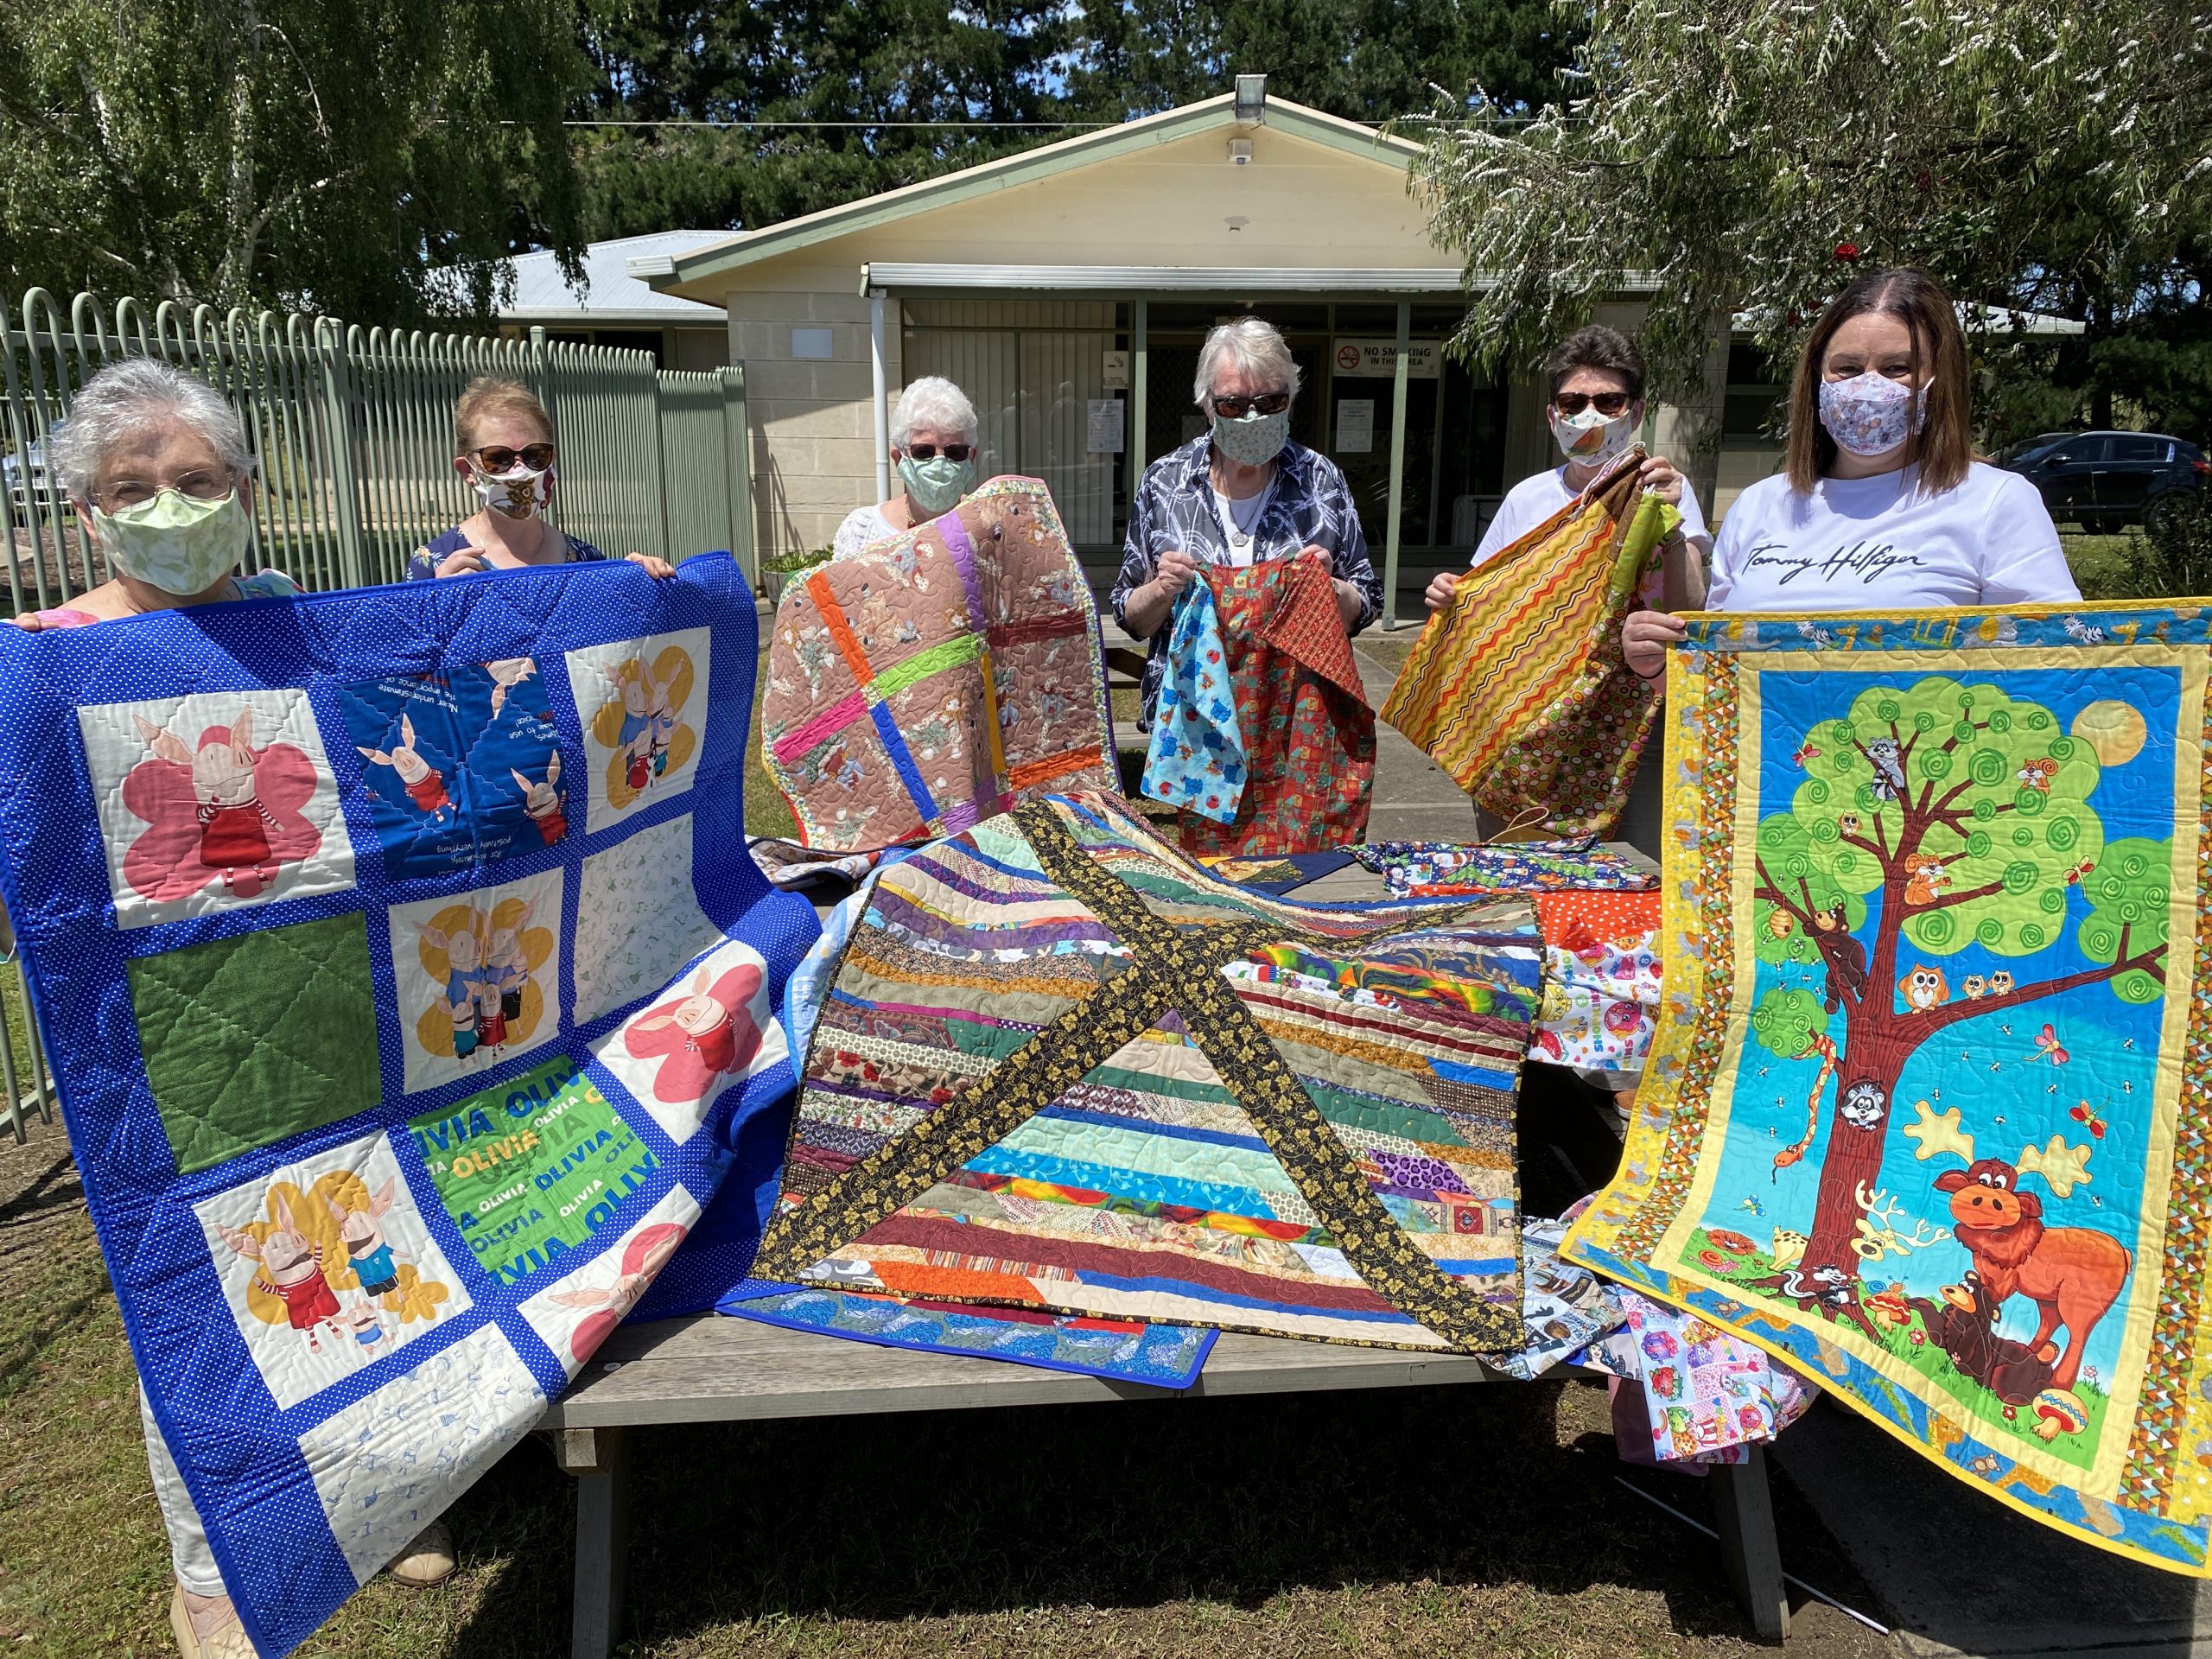 TREASURED SUPPORT: ac.care foster care manager Sherri Winter (right) with members of the Pine Tree Quilters during the recent handover of 17 hand-made quilts to be donated to children in foster care on the Limestone Coast, along with 139 Santa sacks and 10 small drawstring bags to brighten distribution of donated goods to vulnerable people for Christmas.